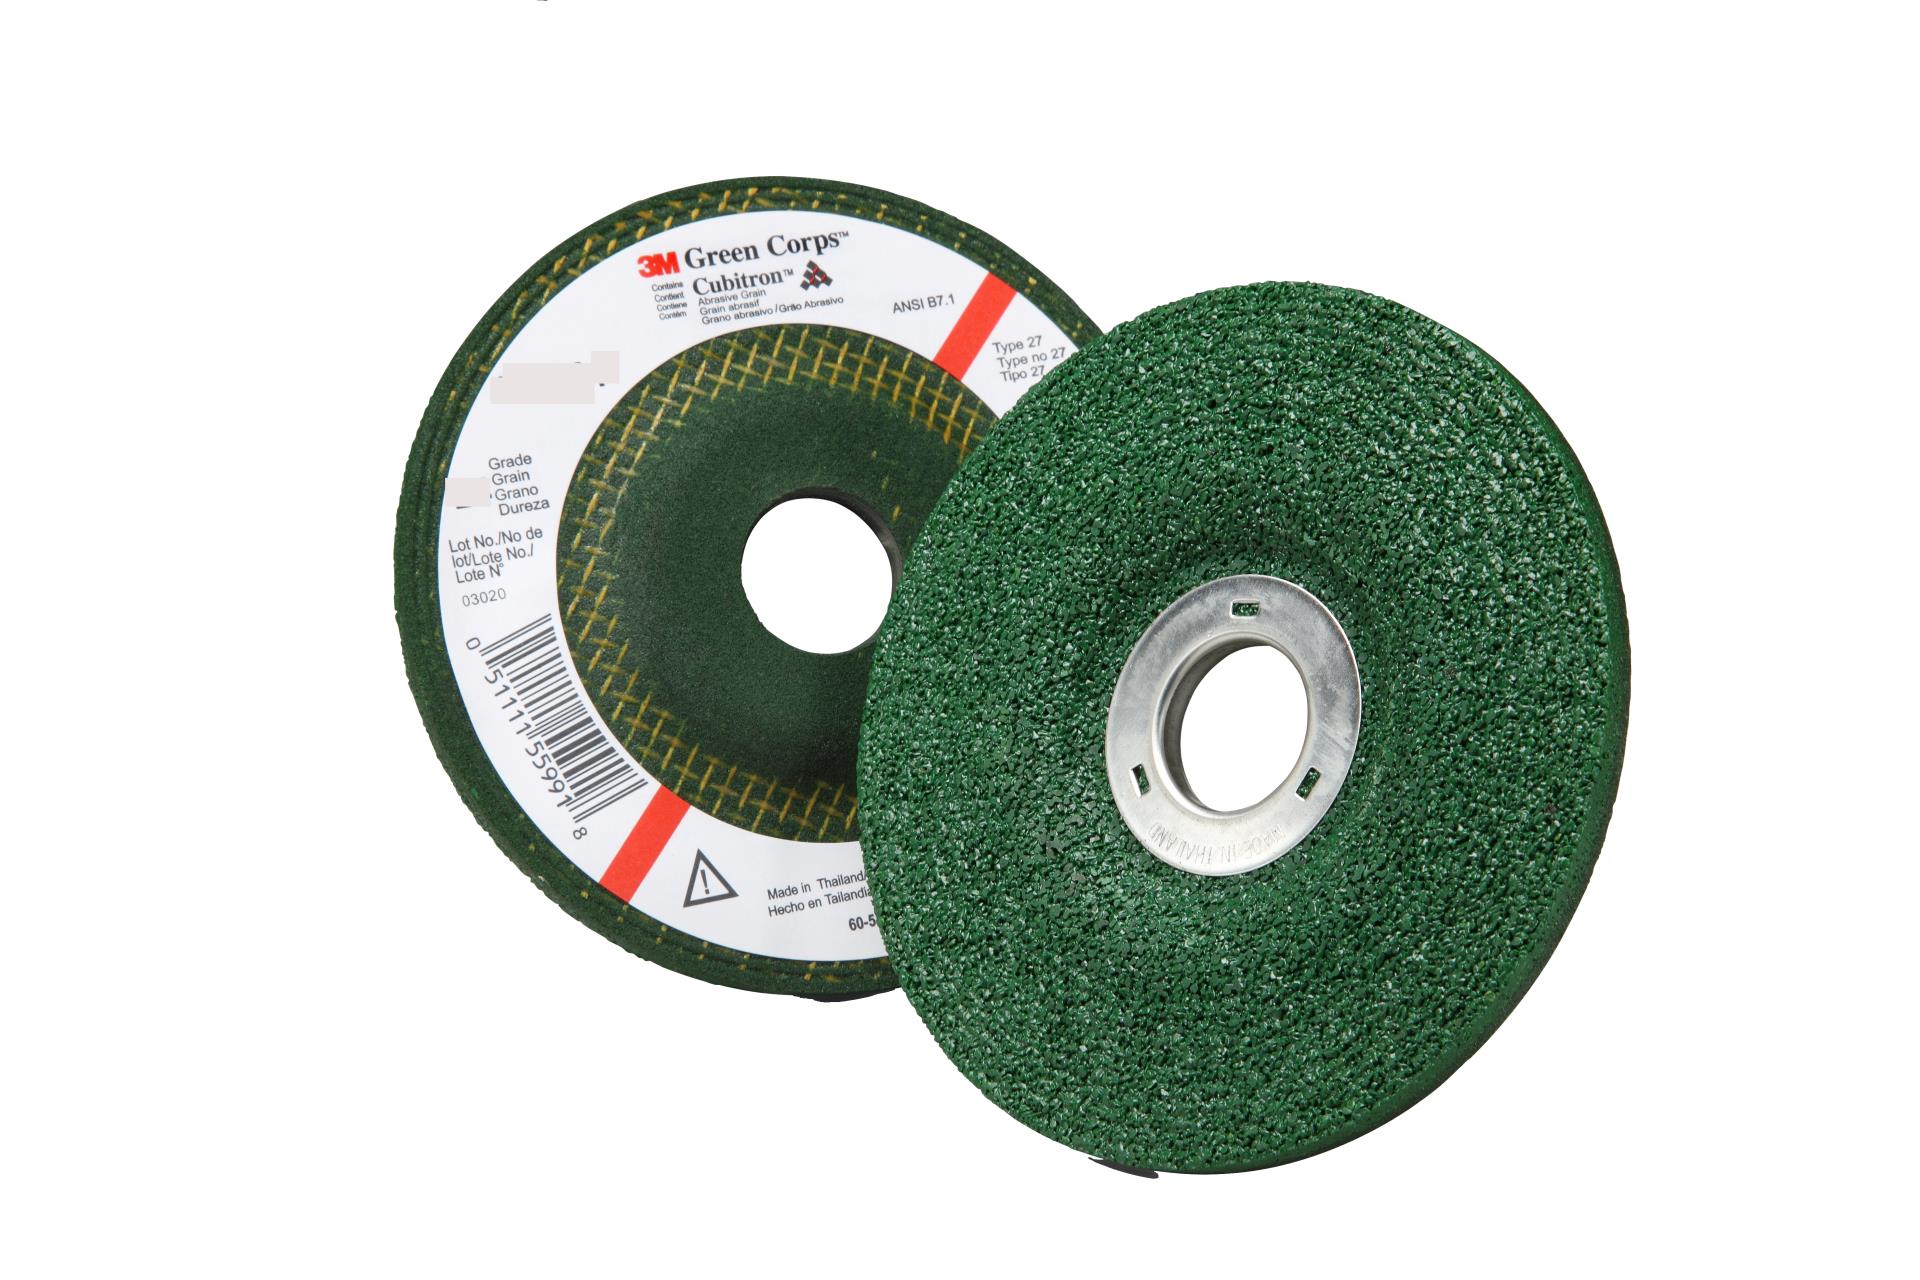 https://www.e-aircraftsupply.com/ItemImages/99/7000118599_3M_Green_Corps_Depressed_Center_Grinding_Wheel.jpg